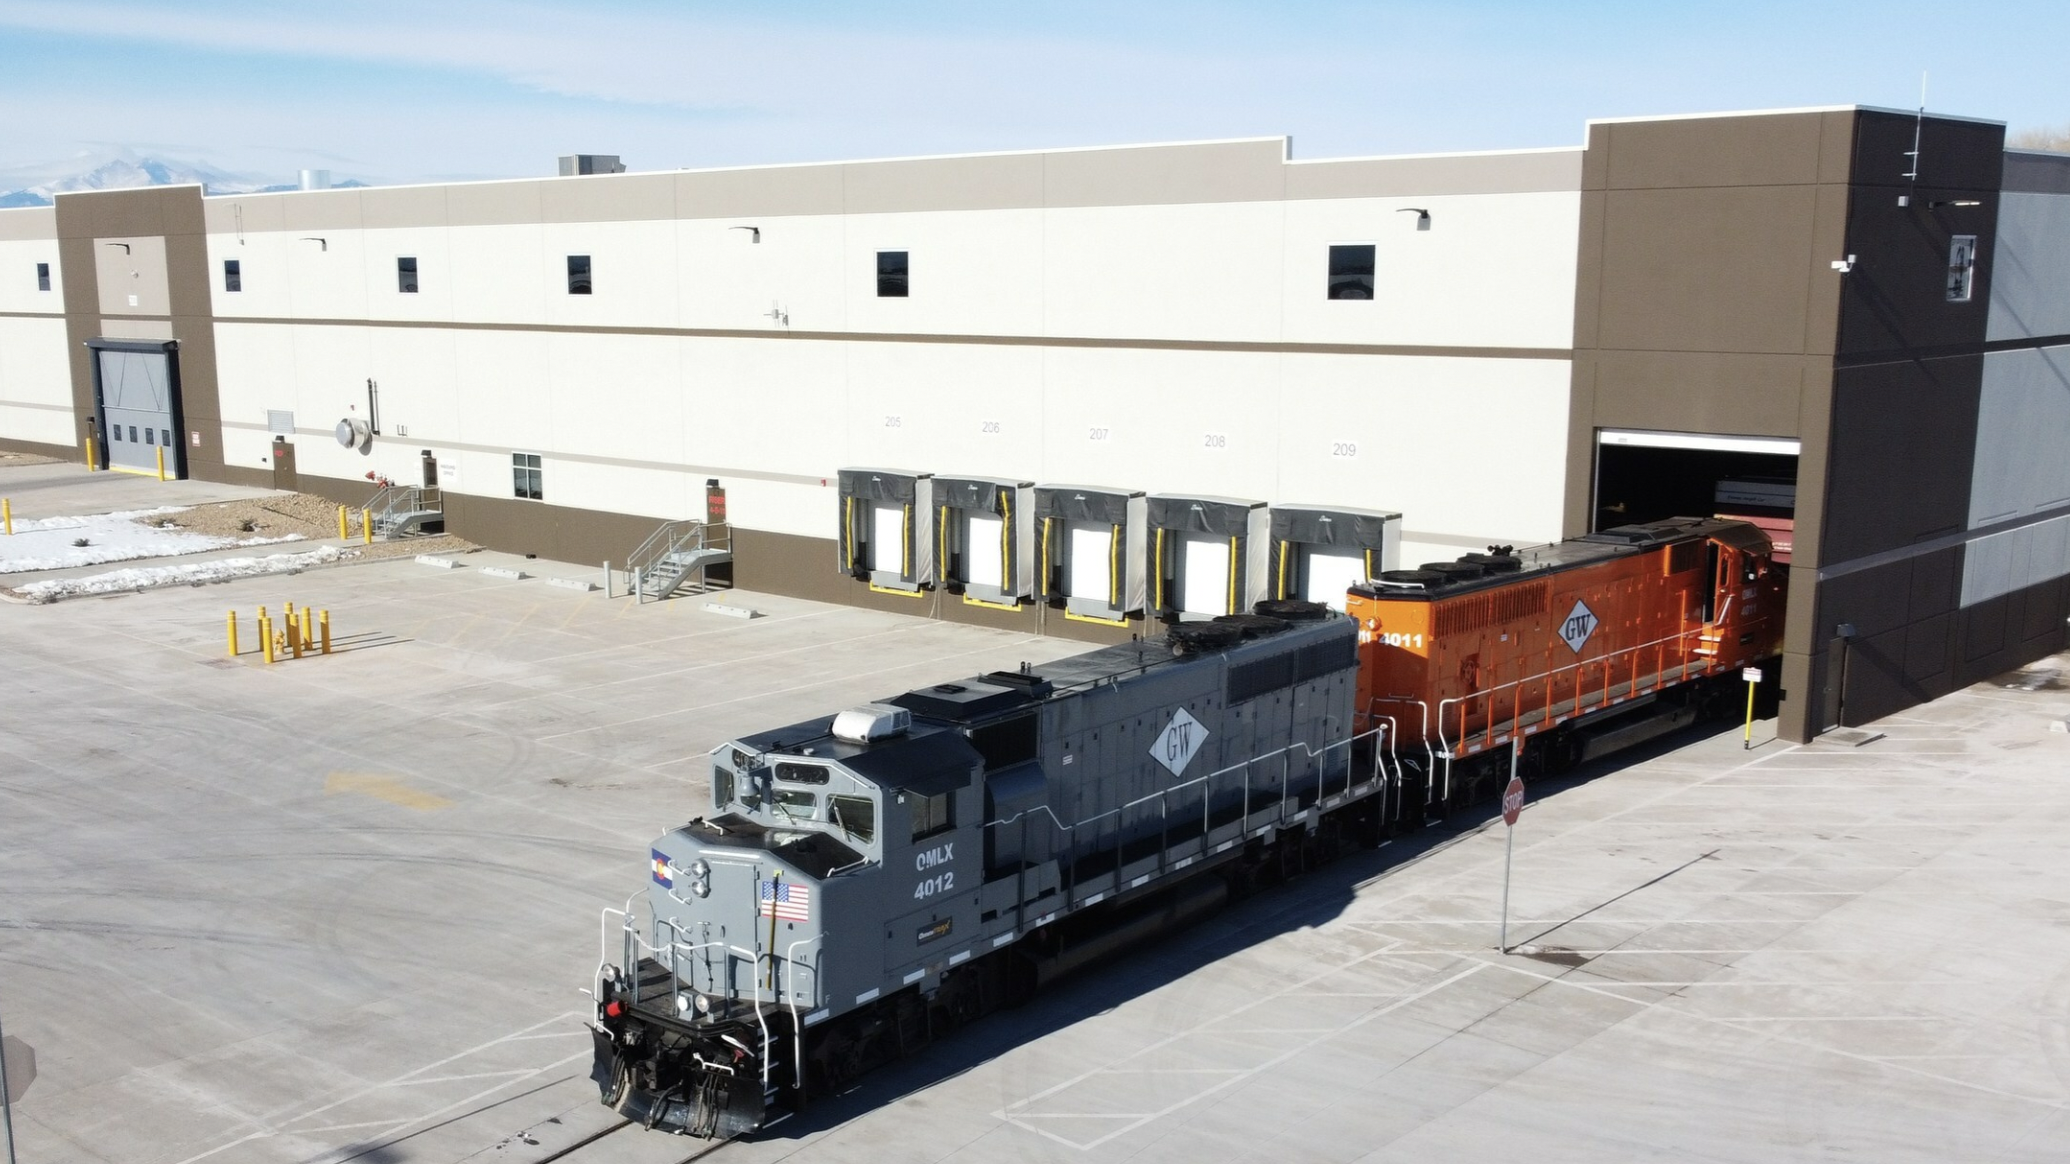 Broe Real Estate Group’s flatbed distribution center for The Home Depot (pictured) has been recognized as NAIOP’s 2022 Industrial Development of the Year. It is served by OmniTRAX’s Great Western Railway of Colorado. Broe Real Estate Group and OmniTRAX are affiliates of The Broe Group. (Photograph Courtesy of OmniTRAX)